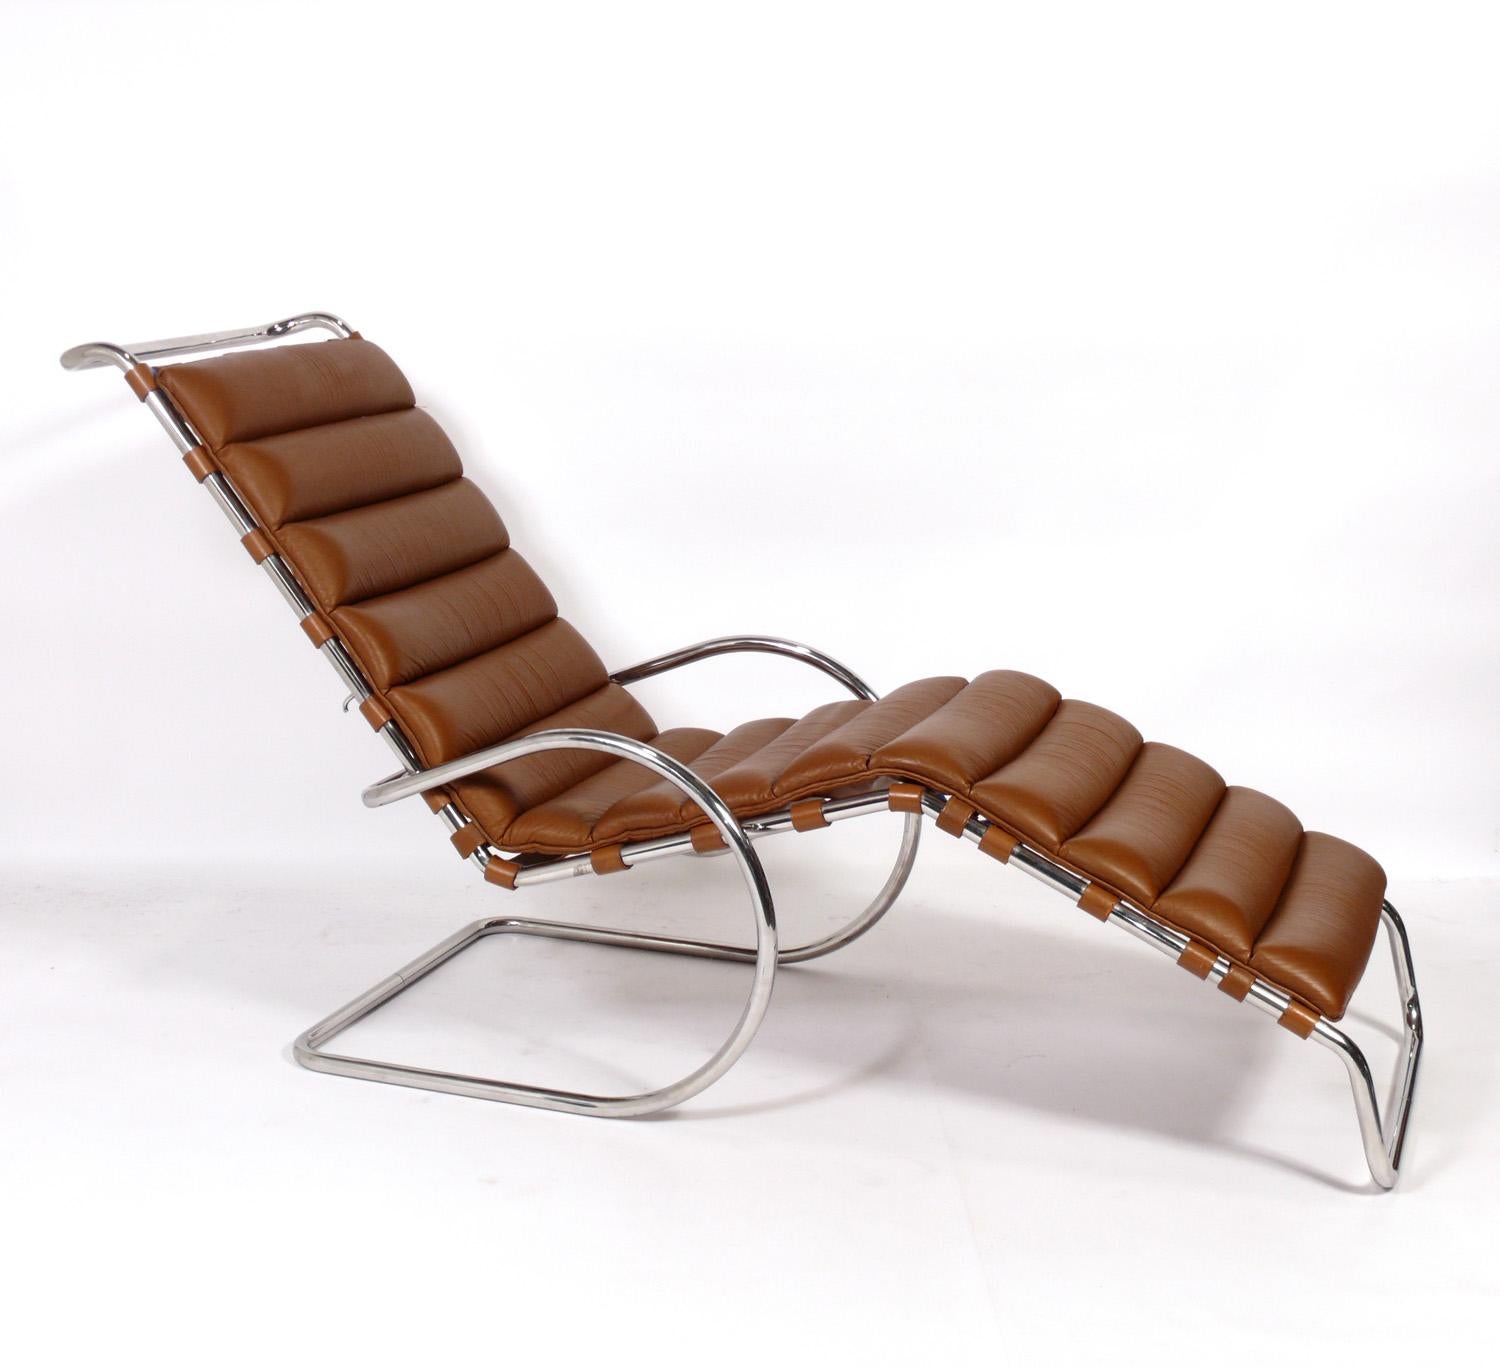 American Mies van der Rohe for Knoll Chaise Lounge in Caramel Leather